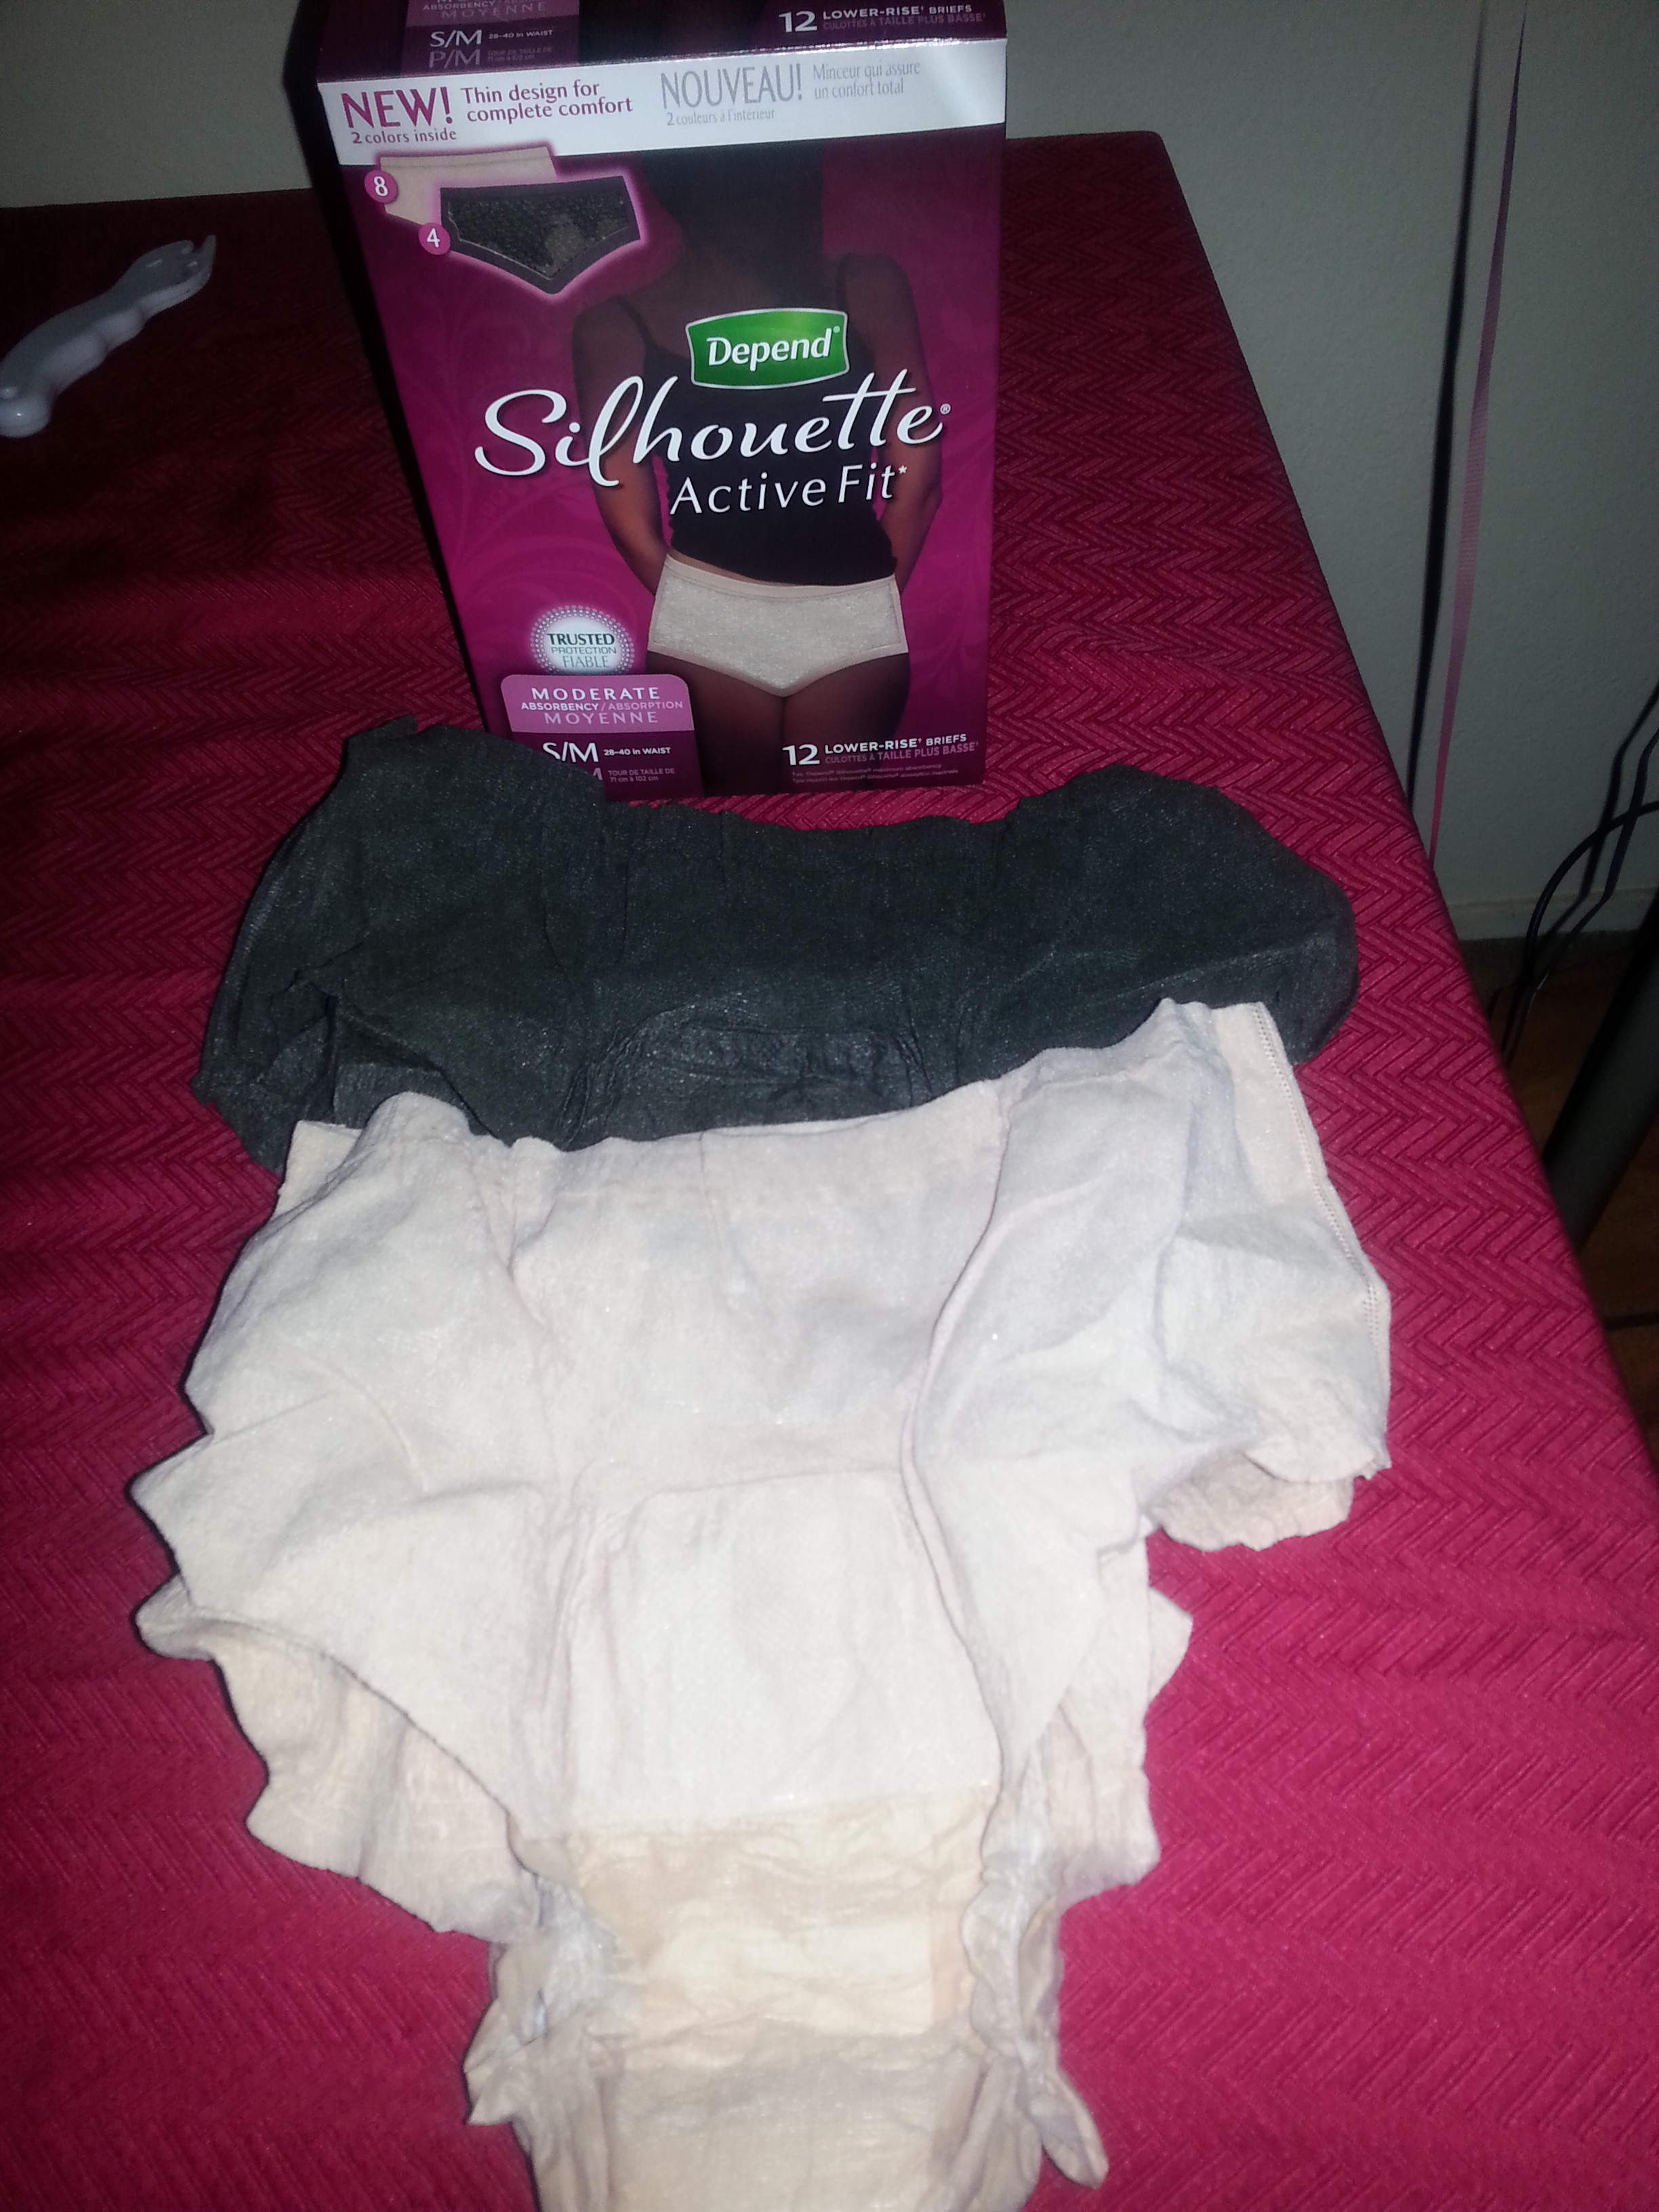 Depend® Silhouette Active Fit Briefs provides the support and comfort I  need!